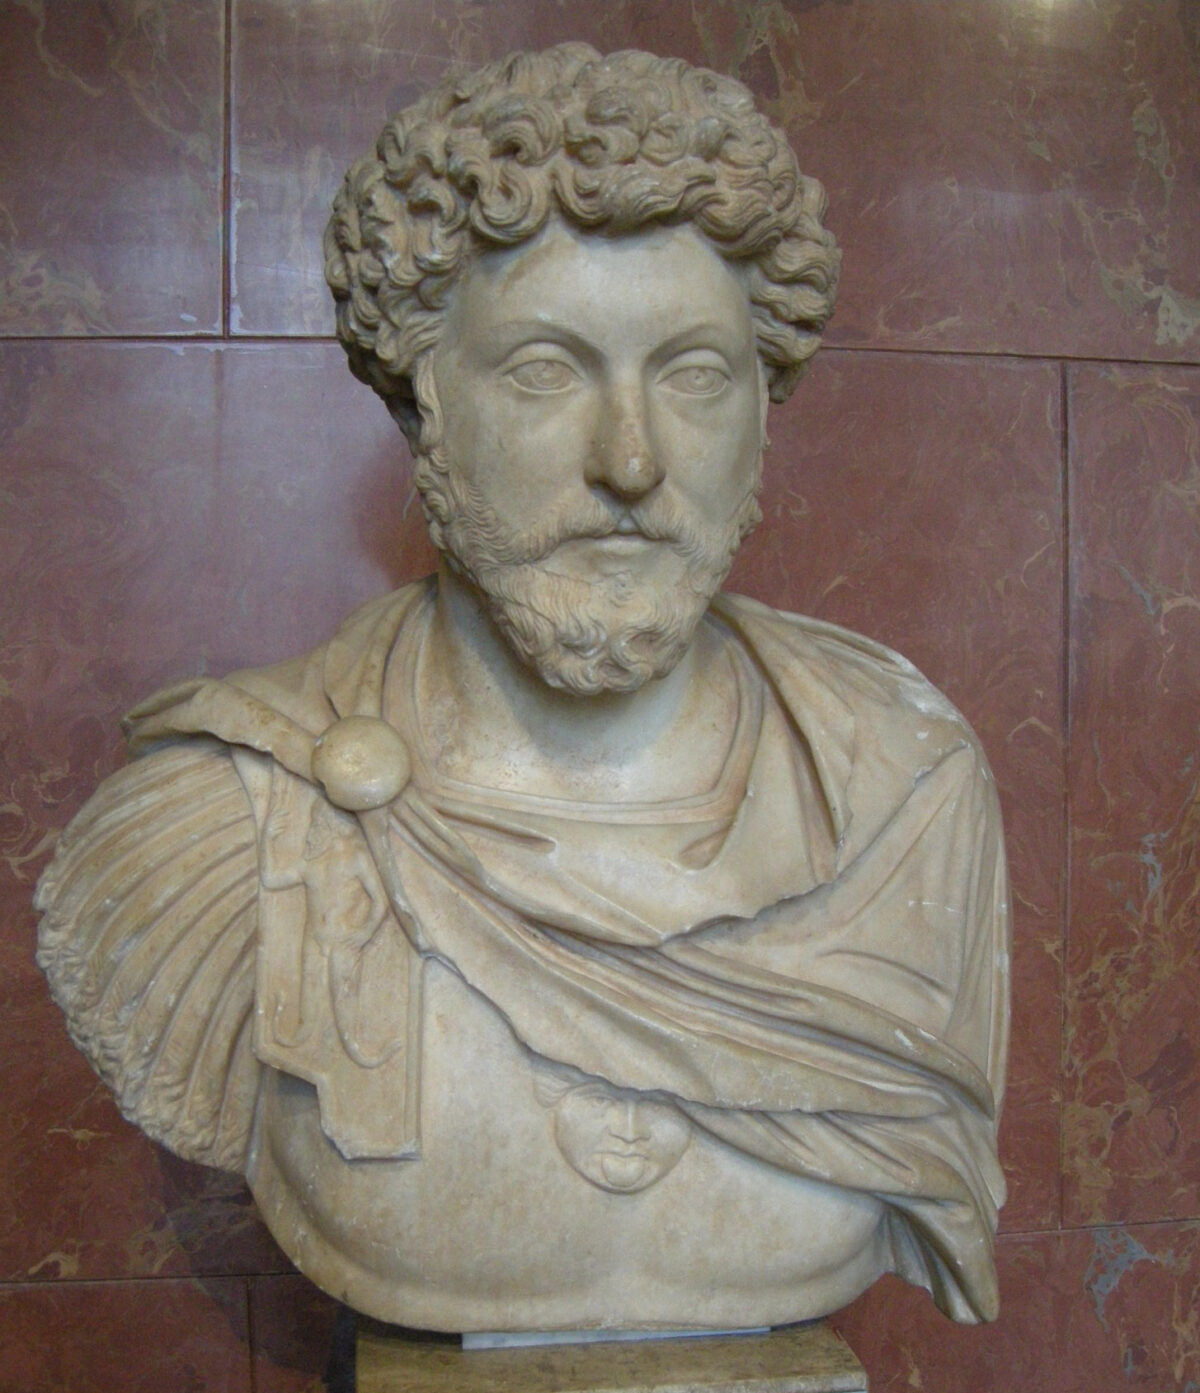 Marcus Aurelius wrote a handbook on character building. A bust of Marcus Aurelius, circa A.D. 161, from Probalinthos, Attica in Greece, now in the Louvre. (CC BY 2.5)